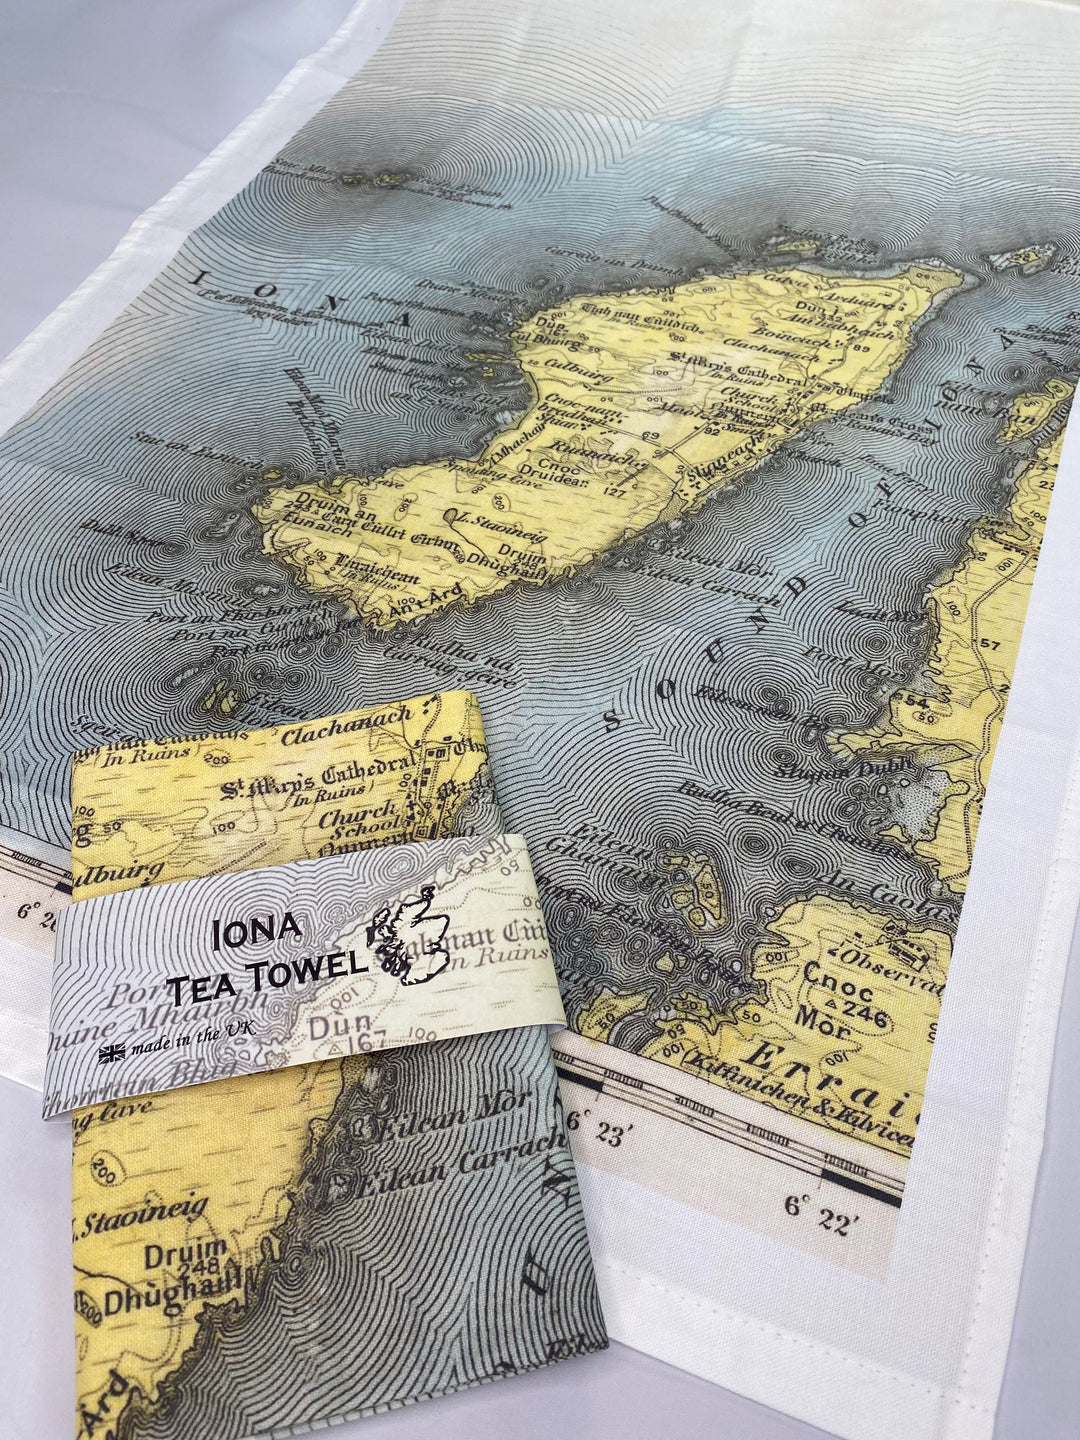 100% cotton tea towel with rare historic map image of the isle of Iona